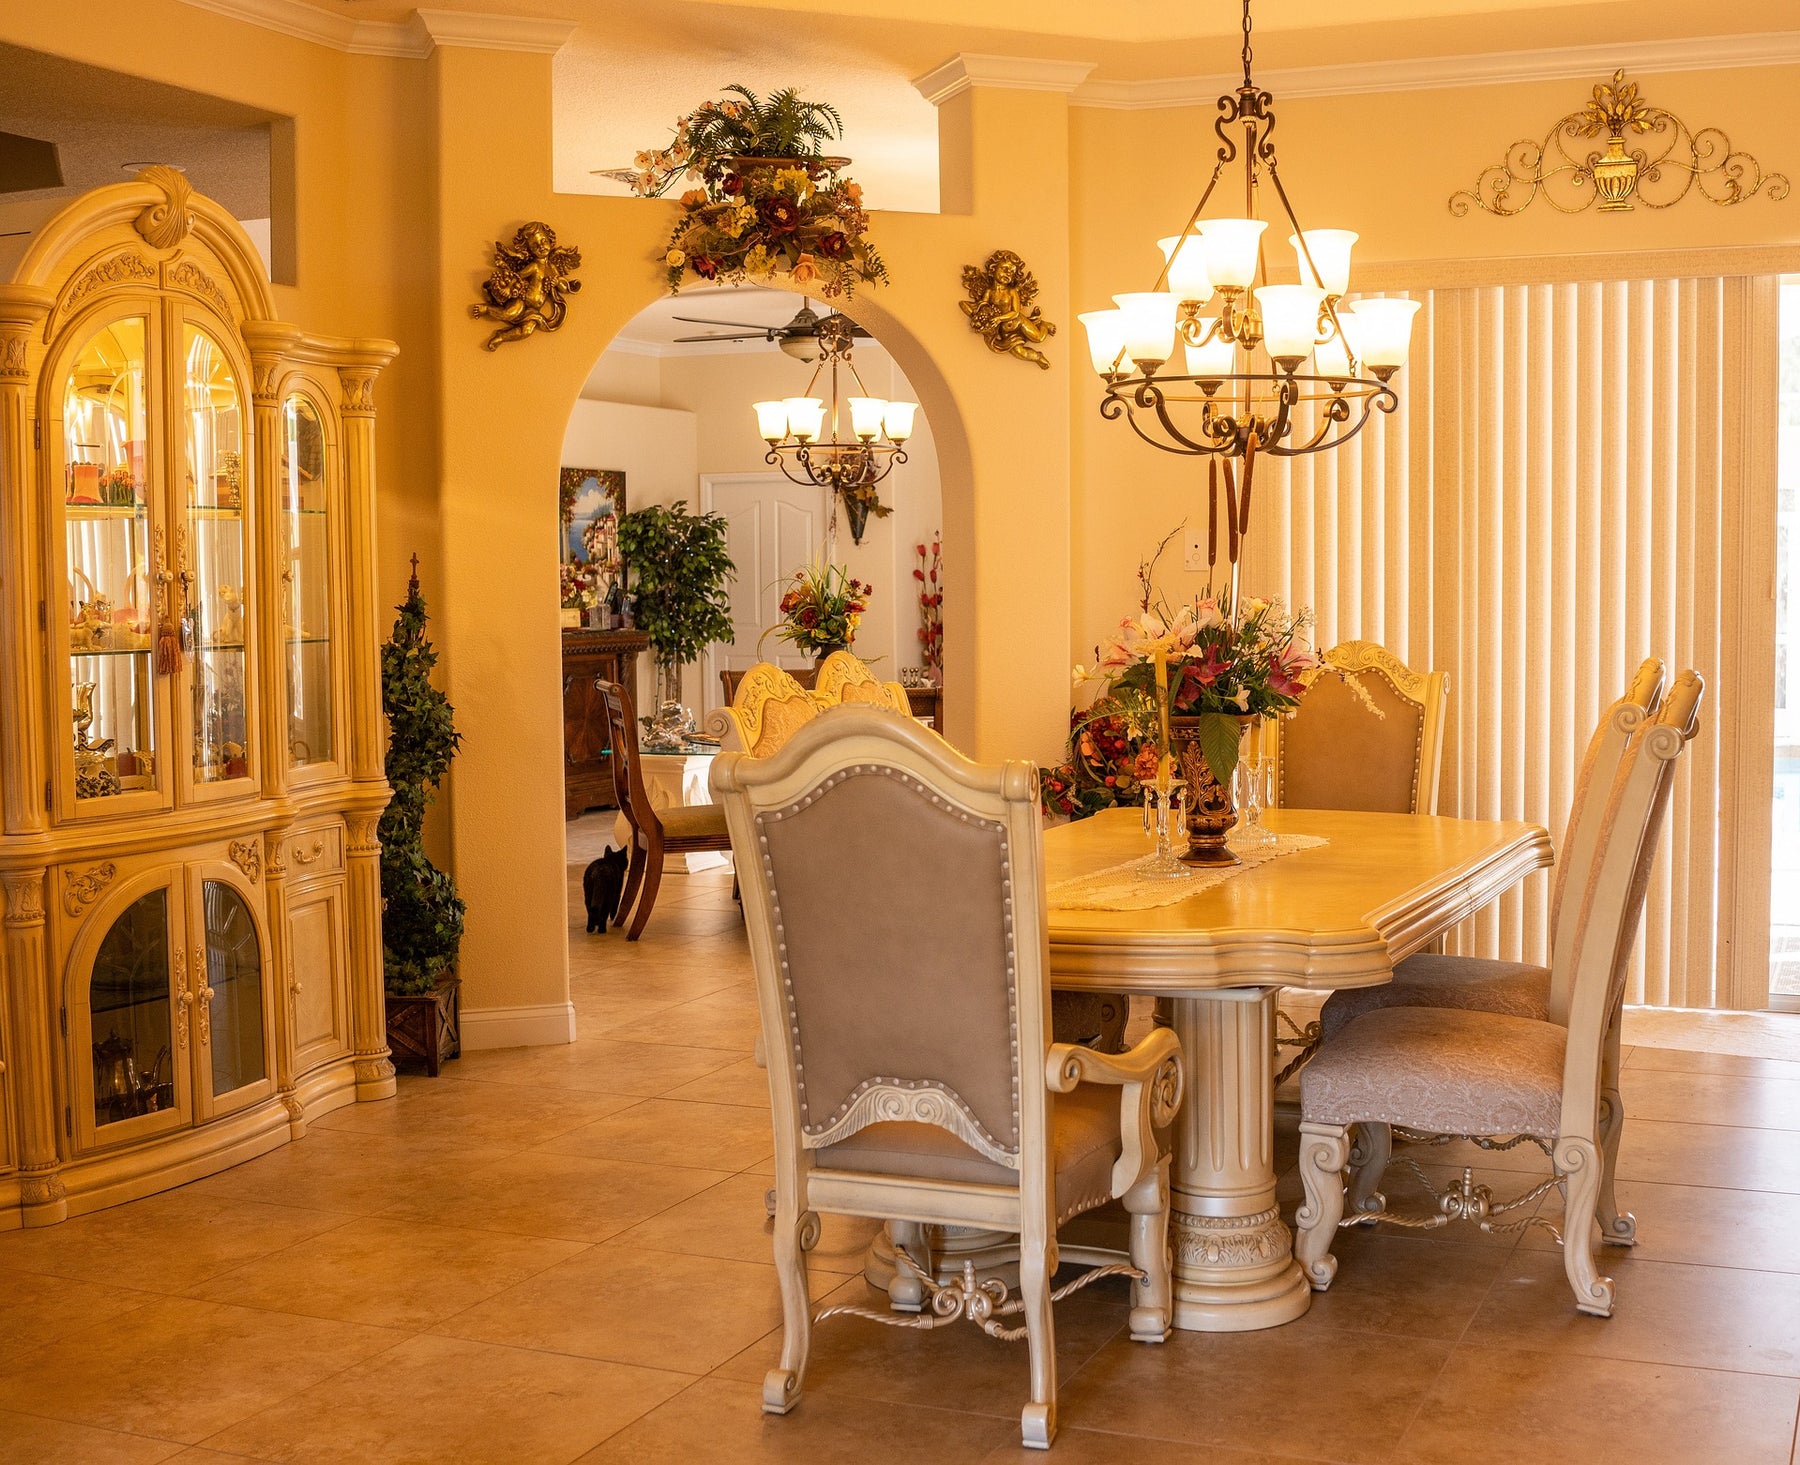 Dining Room Lighting: The Importance of High CRI and High R9